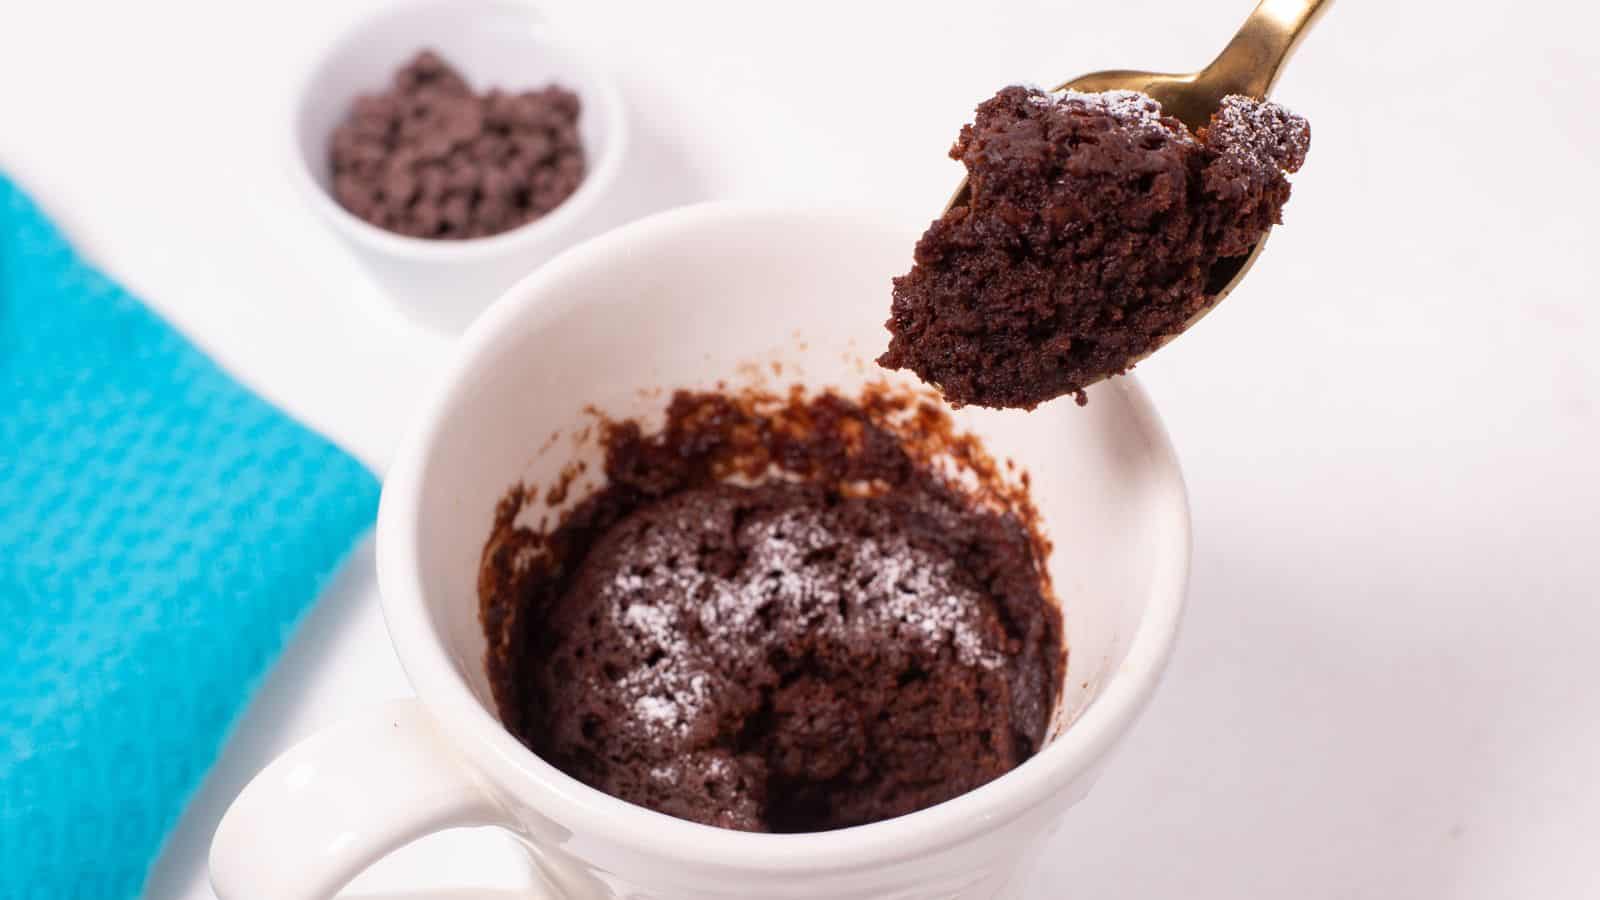 <p>Indulge in a rich and decadent chocolate mug cake for a single serving treat. Quick to make and requiring minimal ingredients, it’s a convenient option for satisfying your chocolate cravings. Whether for a quick dessert or a midnight snack, this mug cake delivers on flavor without the need for extensive baking.<br><strong>Get the Recipe: </strong><a href="https://littlebitrecipes.com/chocolate-mug-cake/?utm_source=msn&utm_medium=page&utm_campaign=msn">Best Chocolate Mug Cake</a></p>